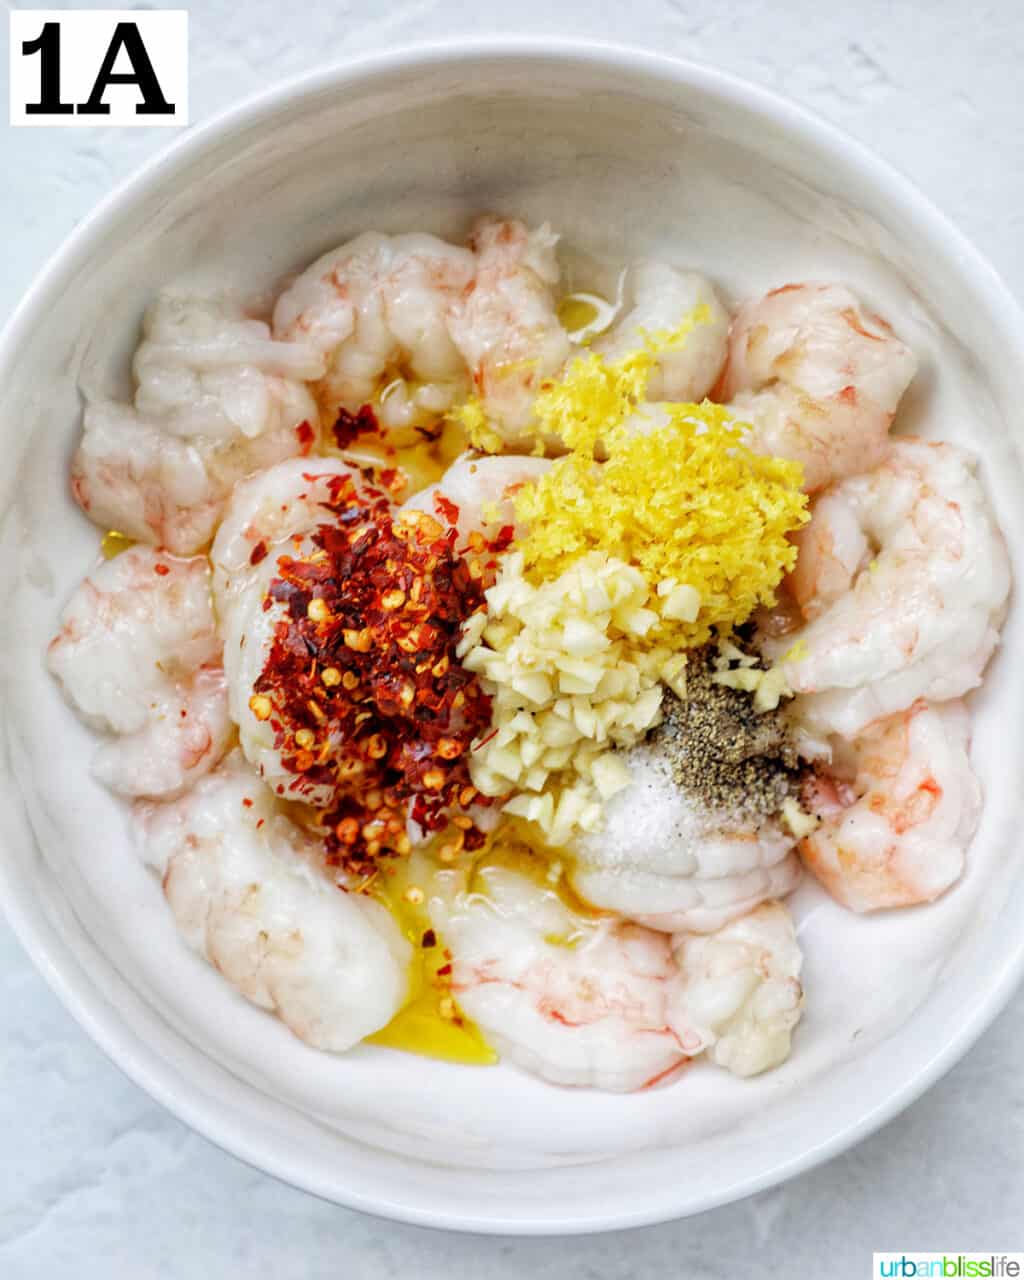 raw shrimp with minced garlic, red pepper flakes, and lemon zest and herbs.